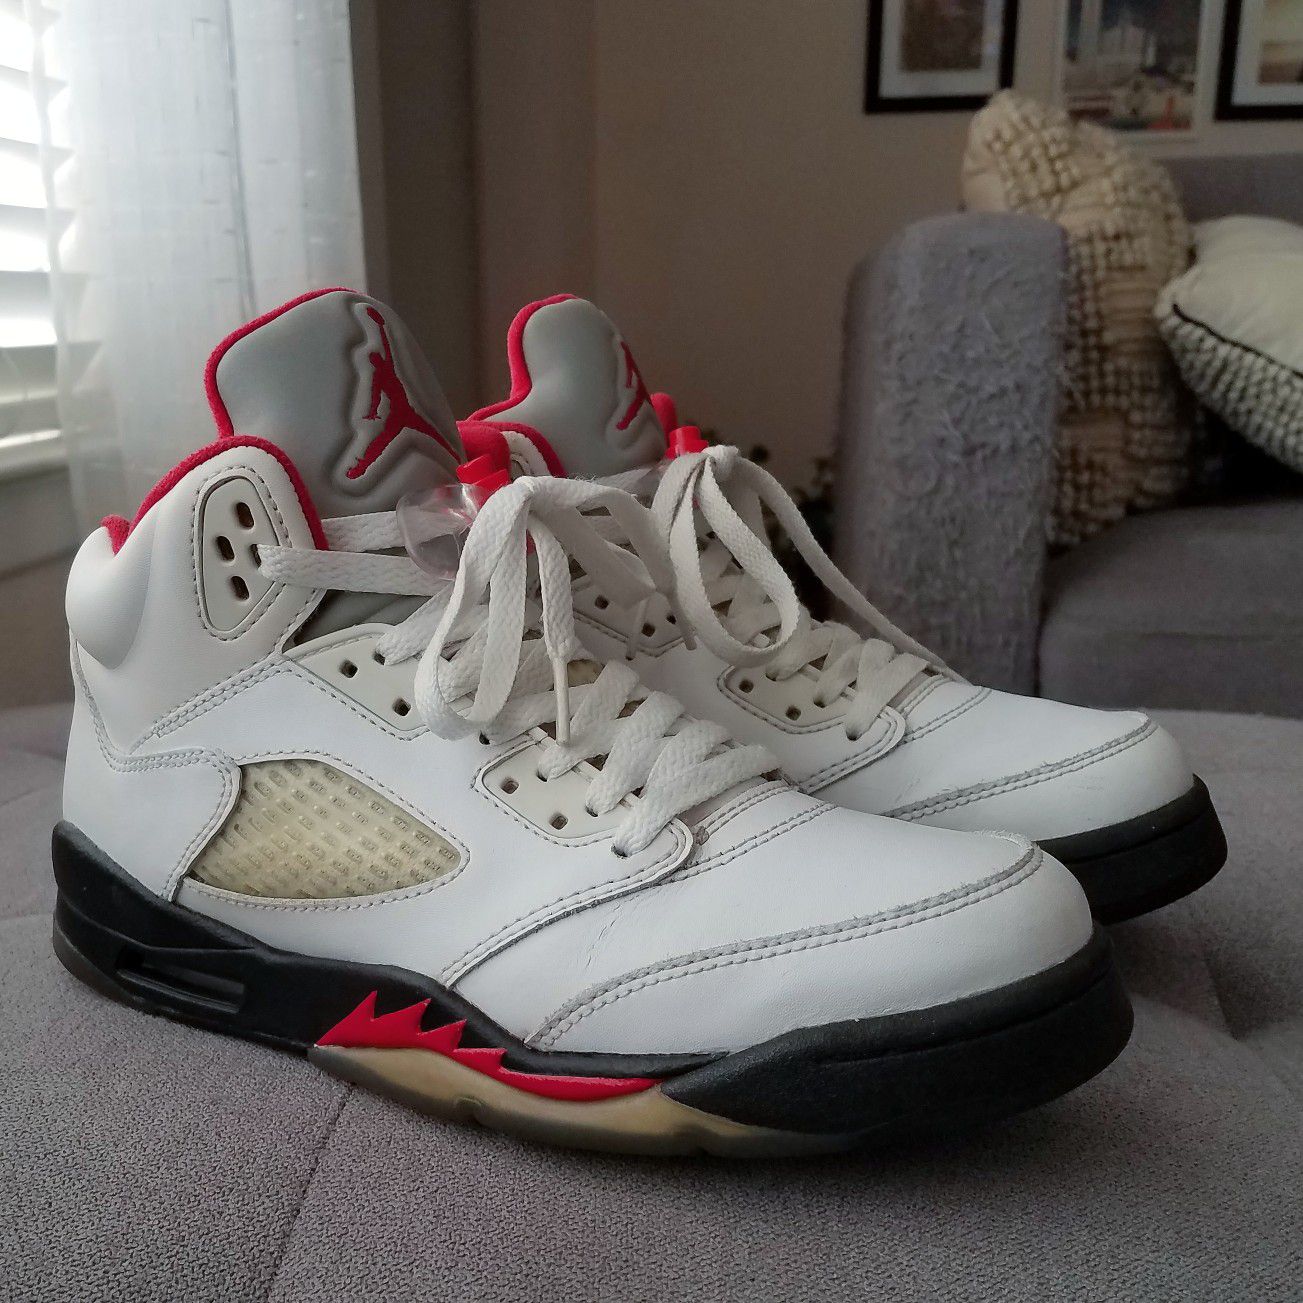 Air Jordan V 5 fire red size 6.5 youth